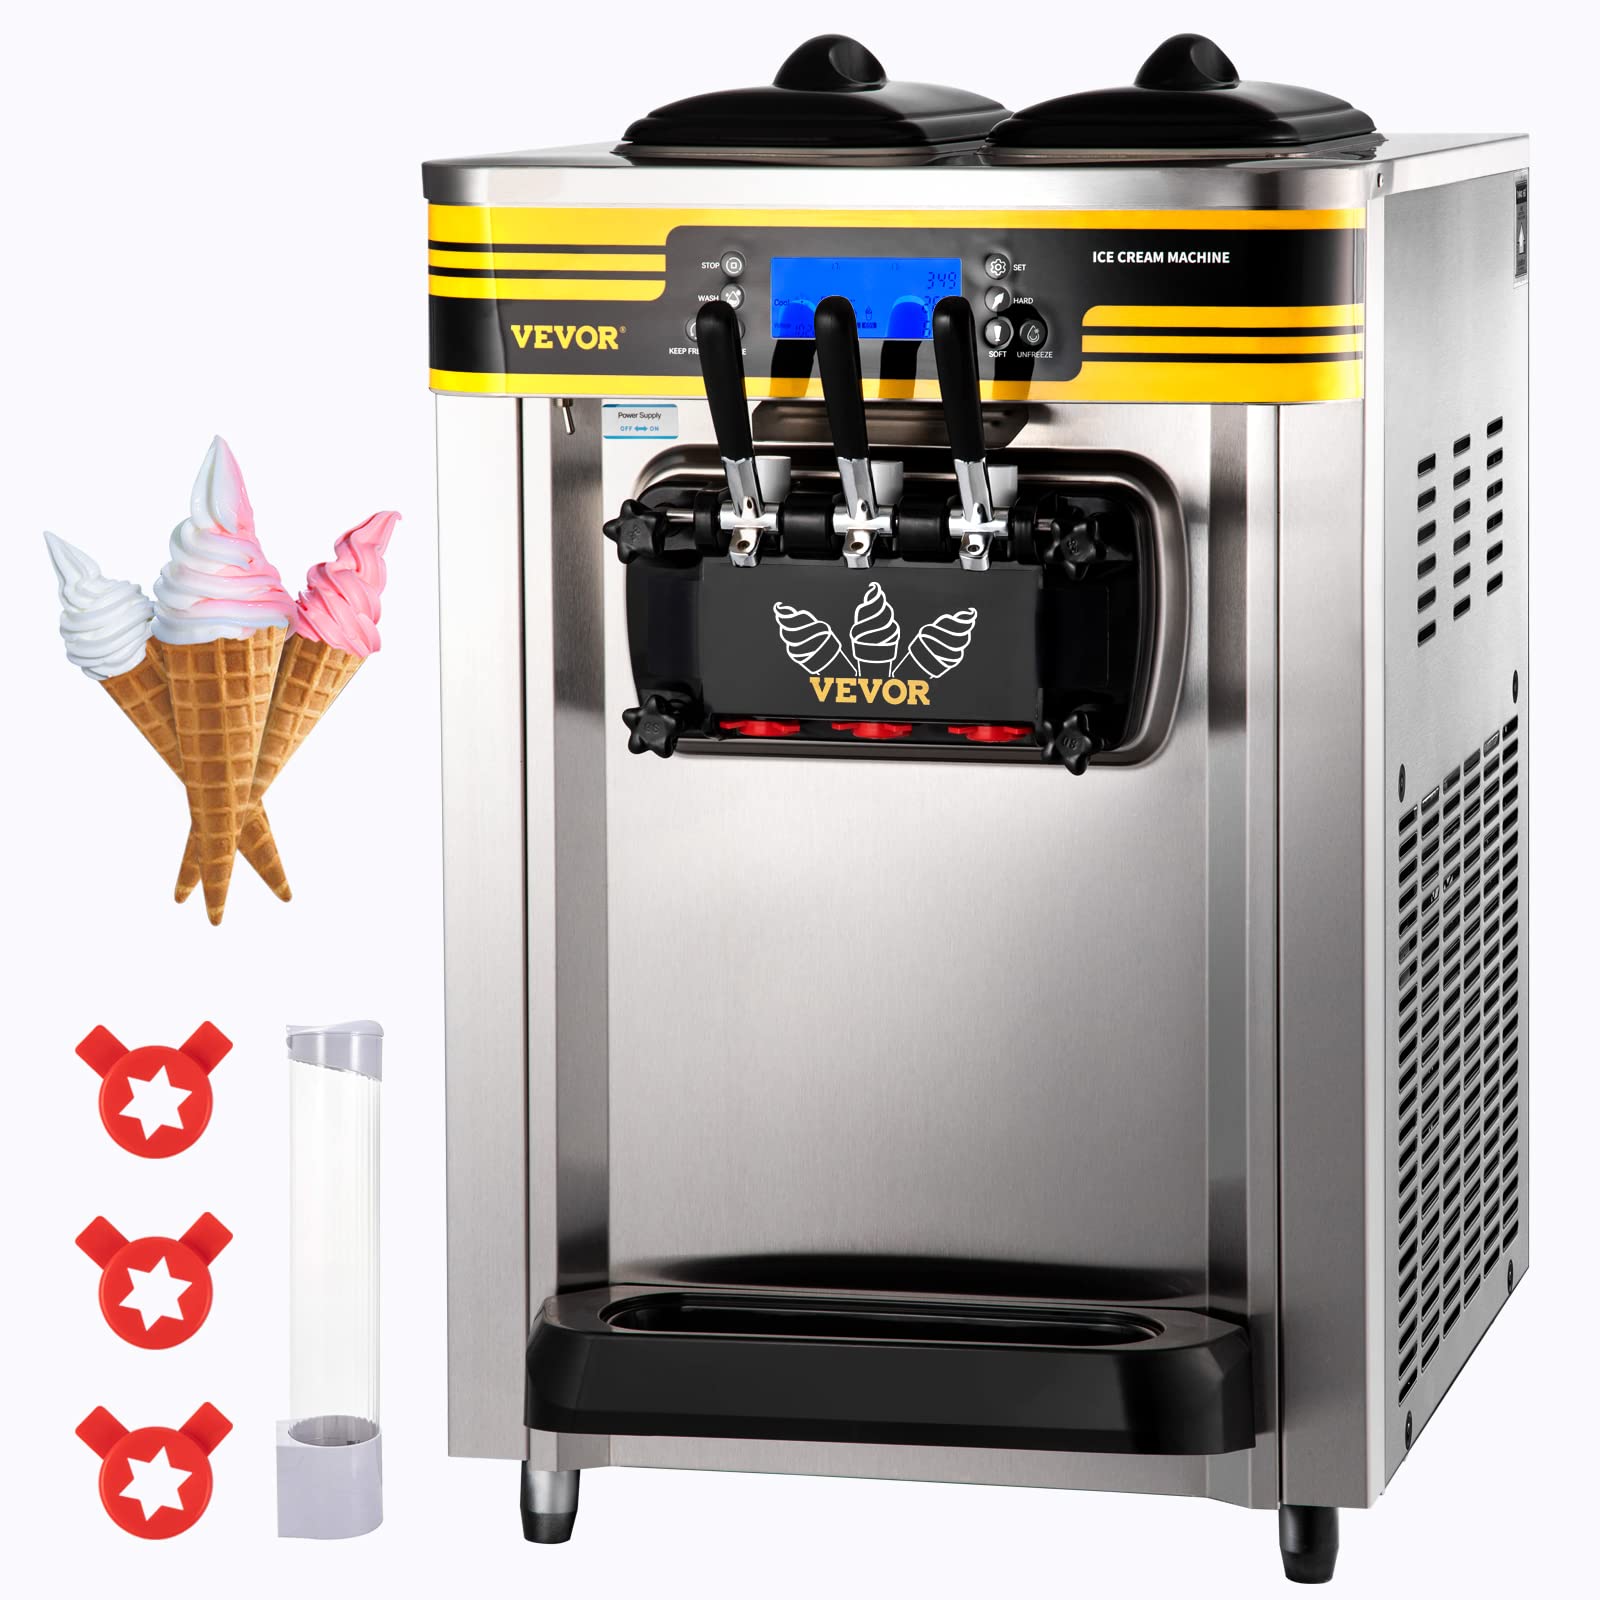 VEVOR commercial Ice cream Maker, 58-8galH Yield, 2350W countertop Soft Serve Machine w 2x6L Hopper 2L cylinder Pre cooling and